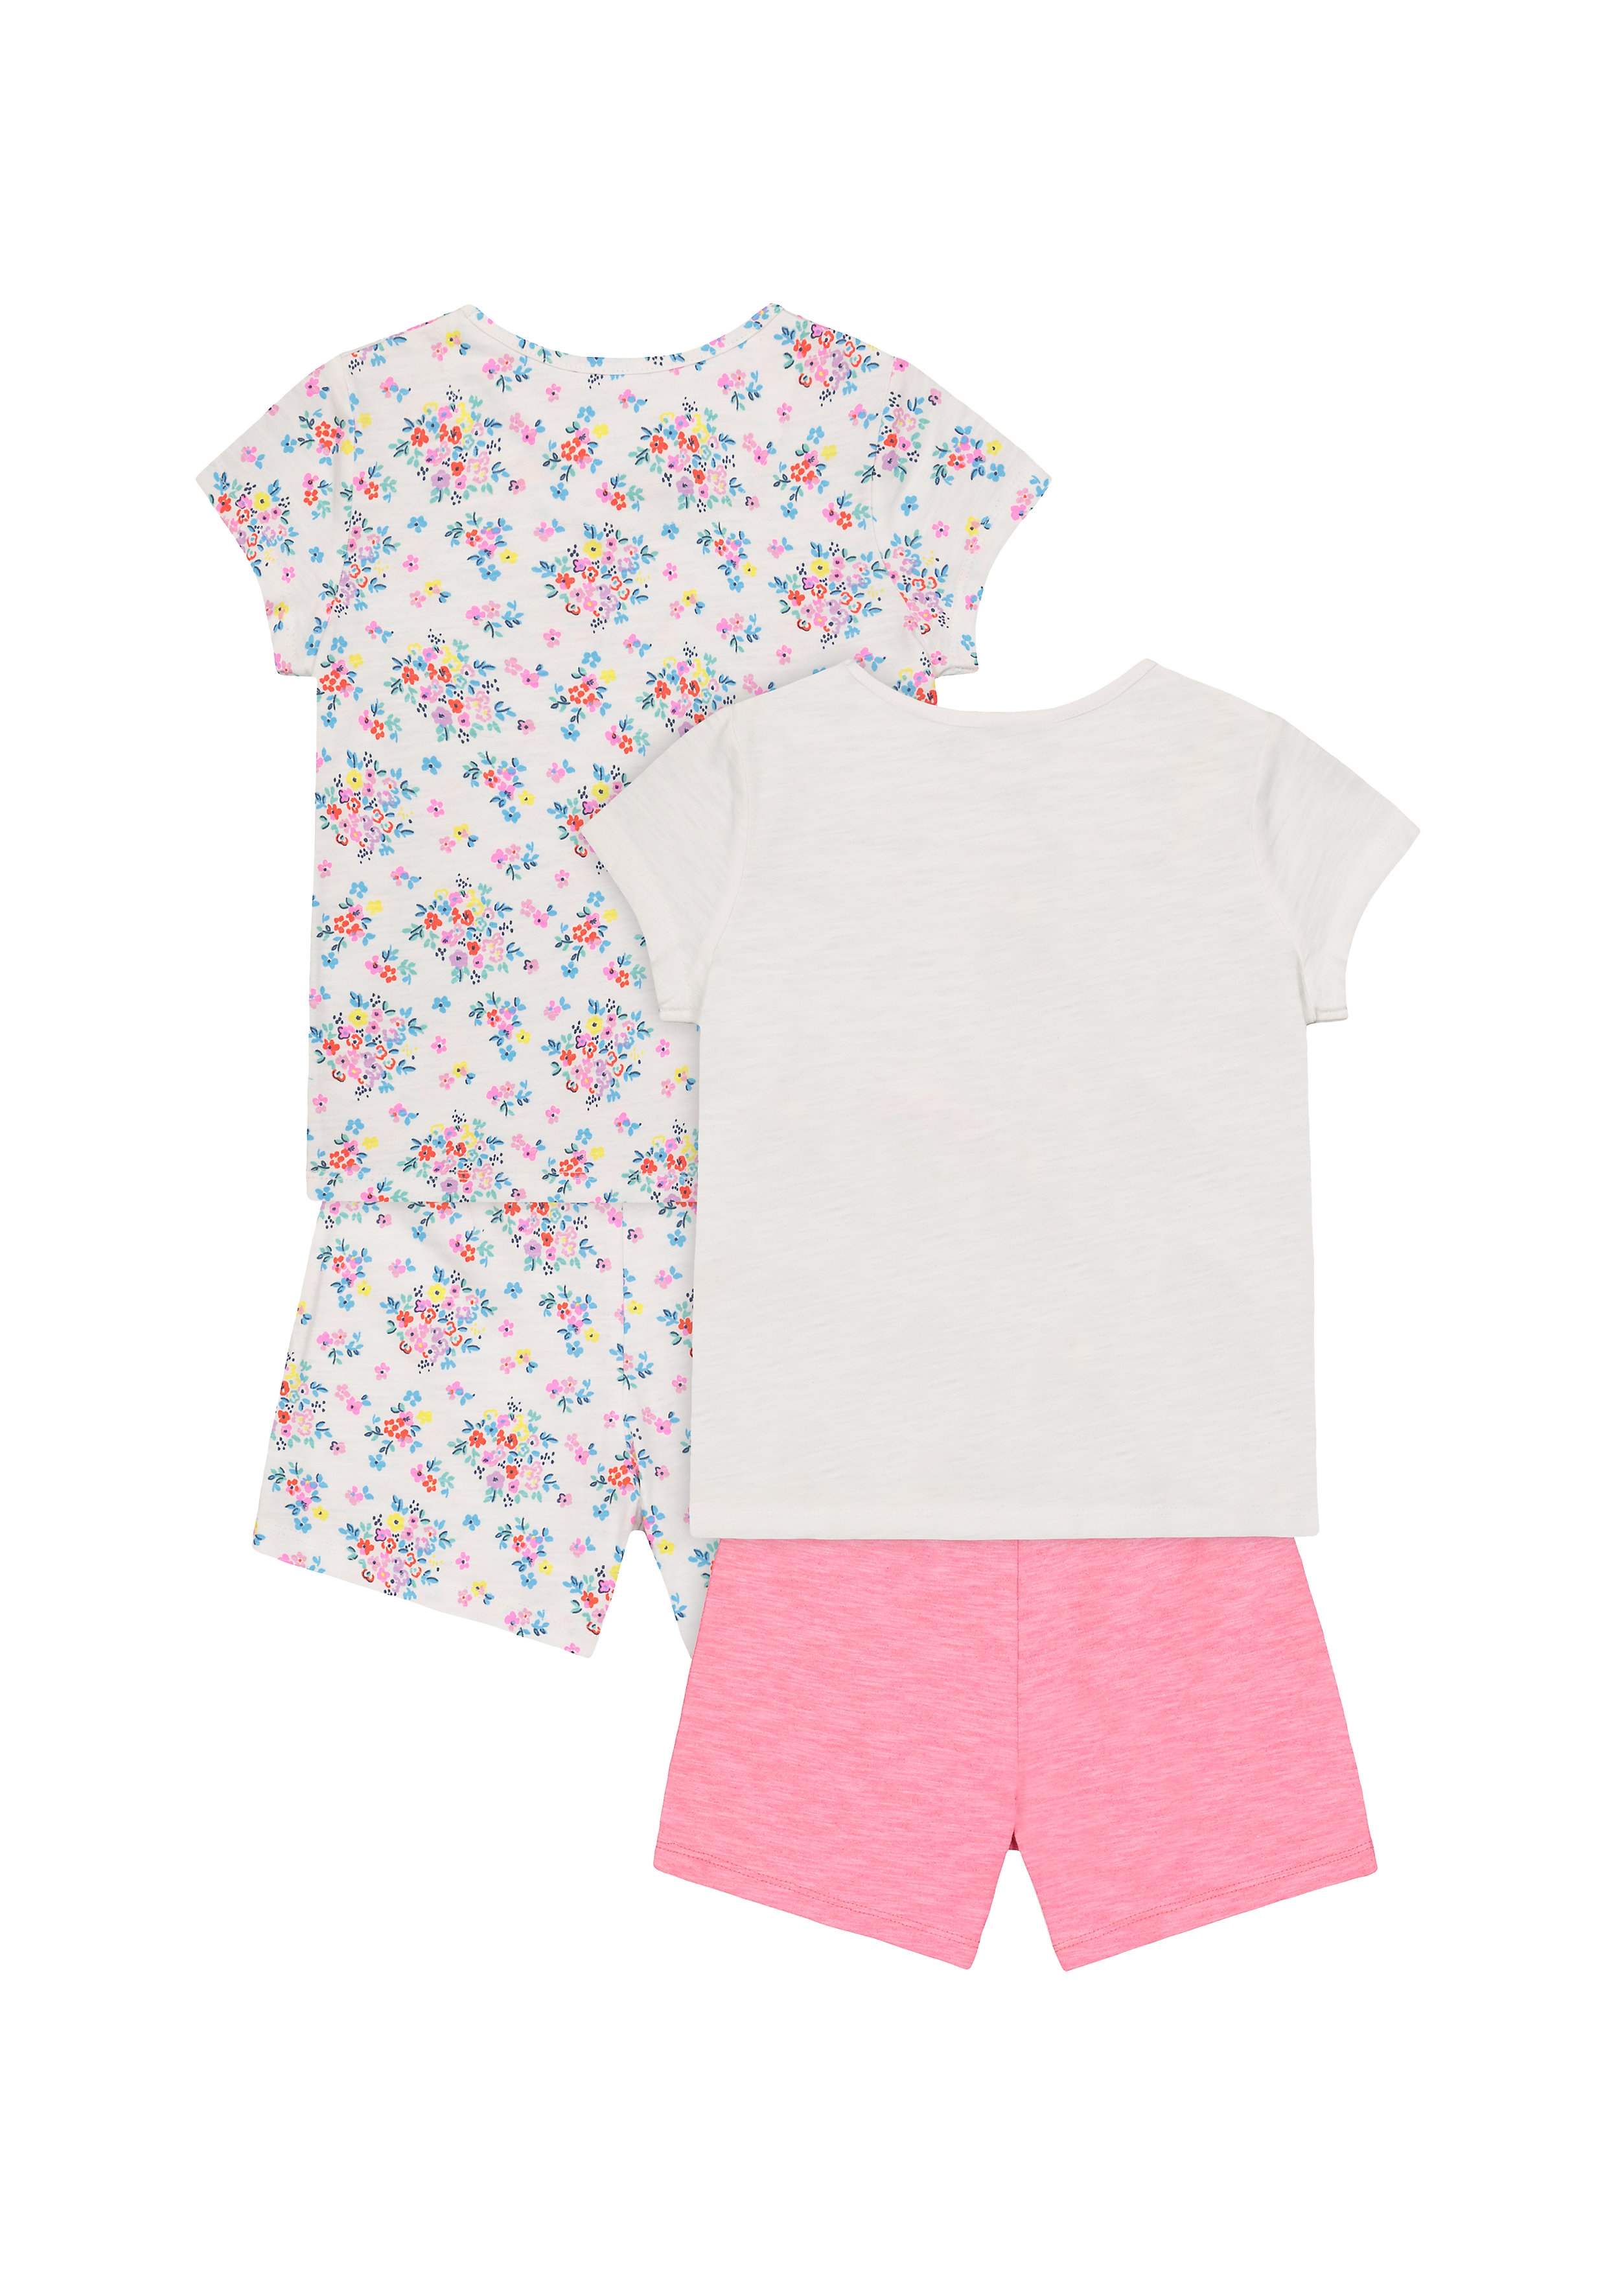 Mothercare | Girls Half Sleeves Shorts Sets  - Pack Of 2 - Pink 1